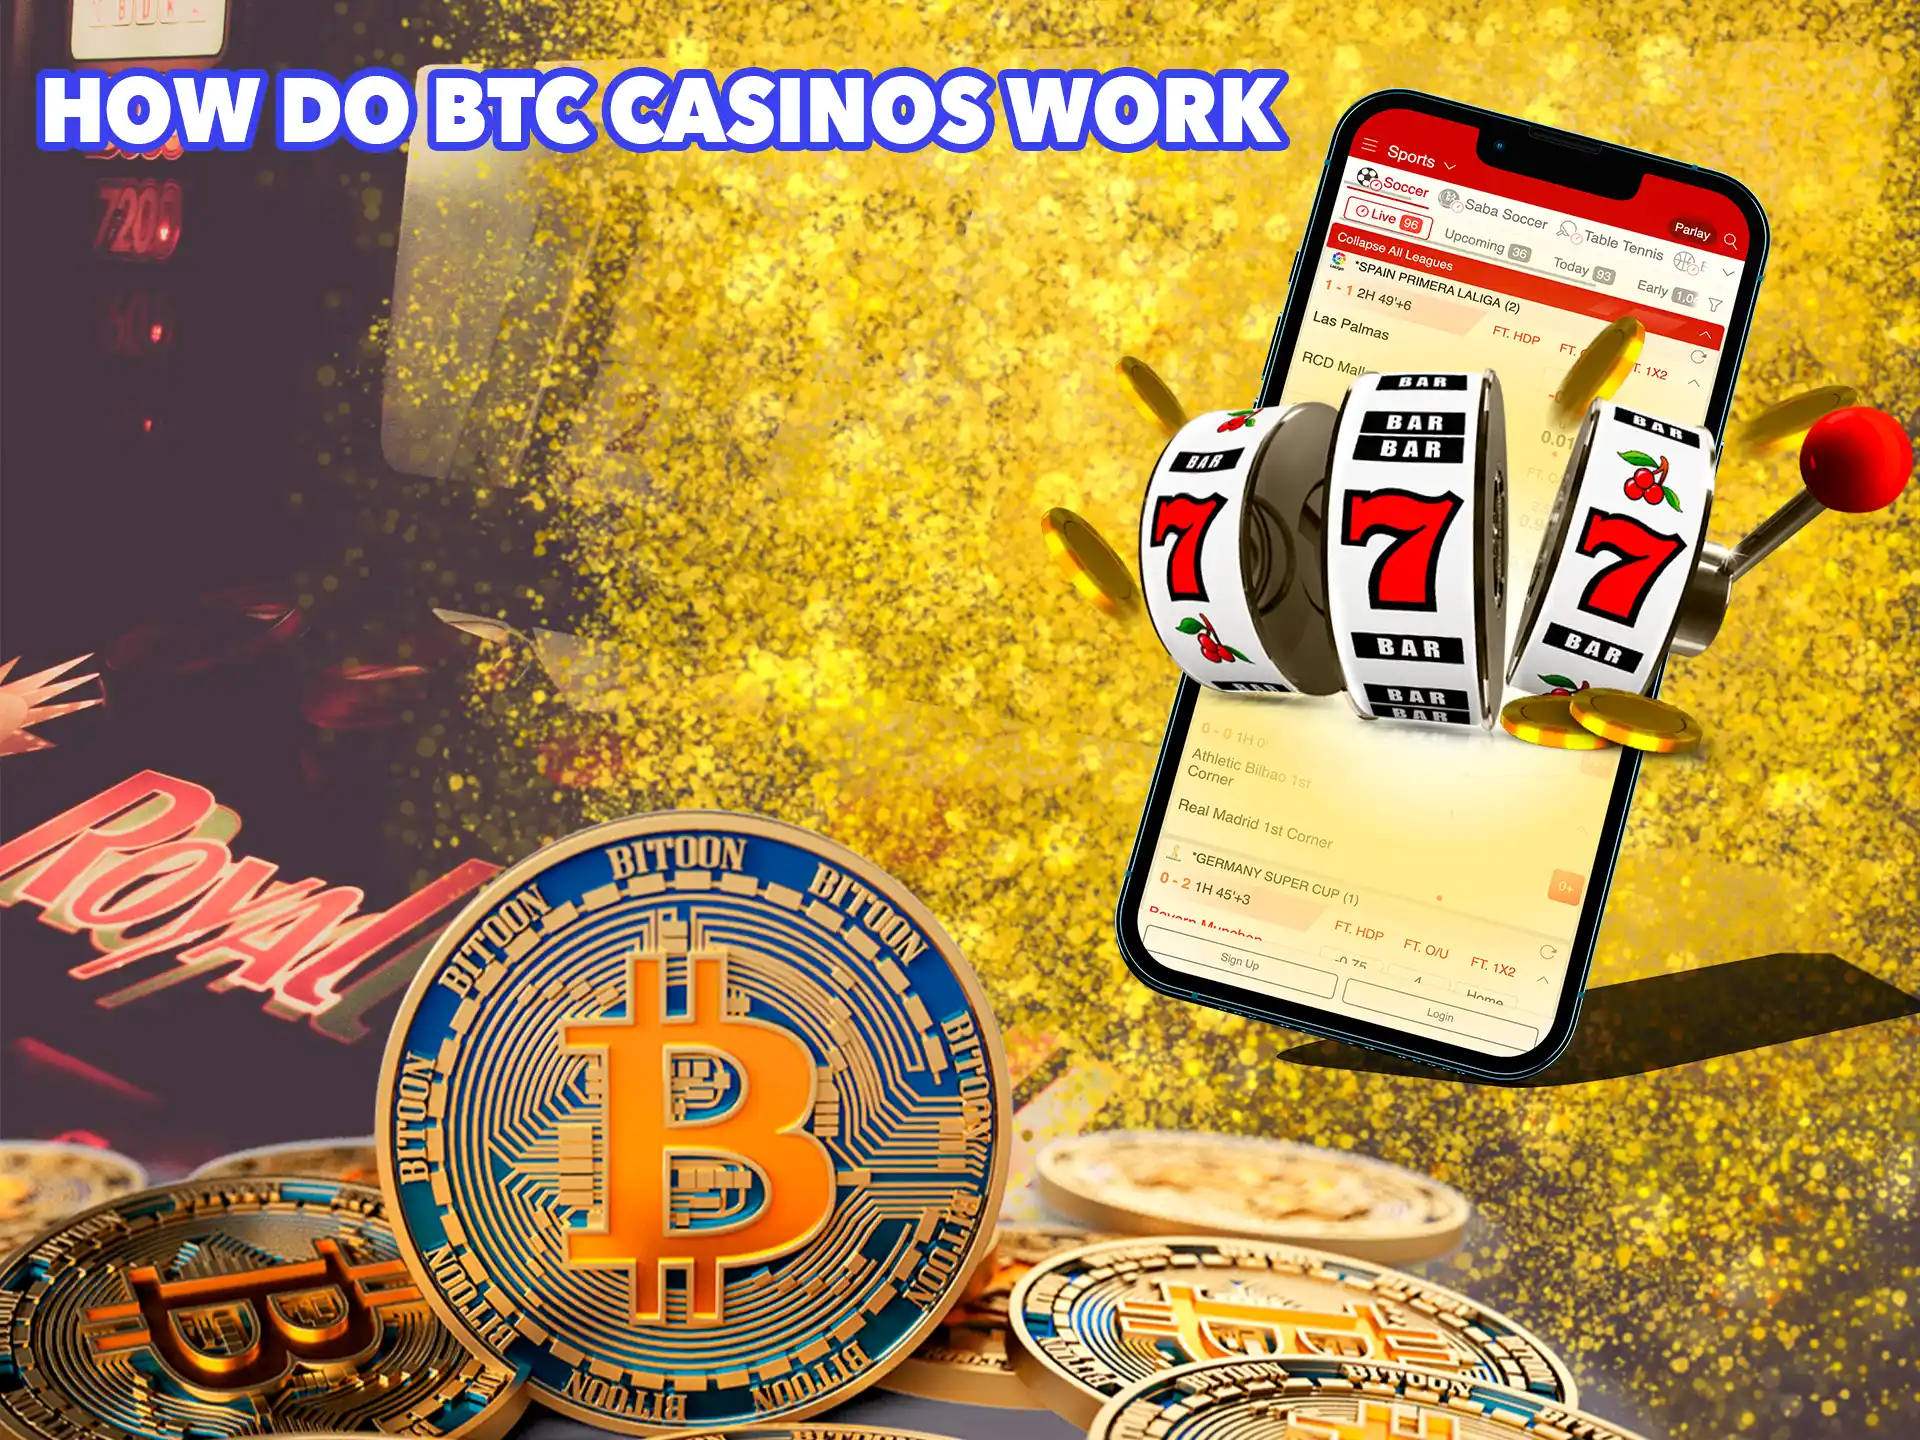 Learn more about the process of interacting with an online casino that works with cryptocurrency.